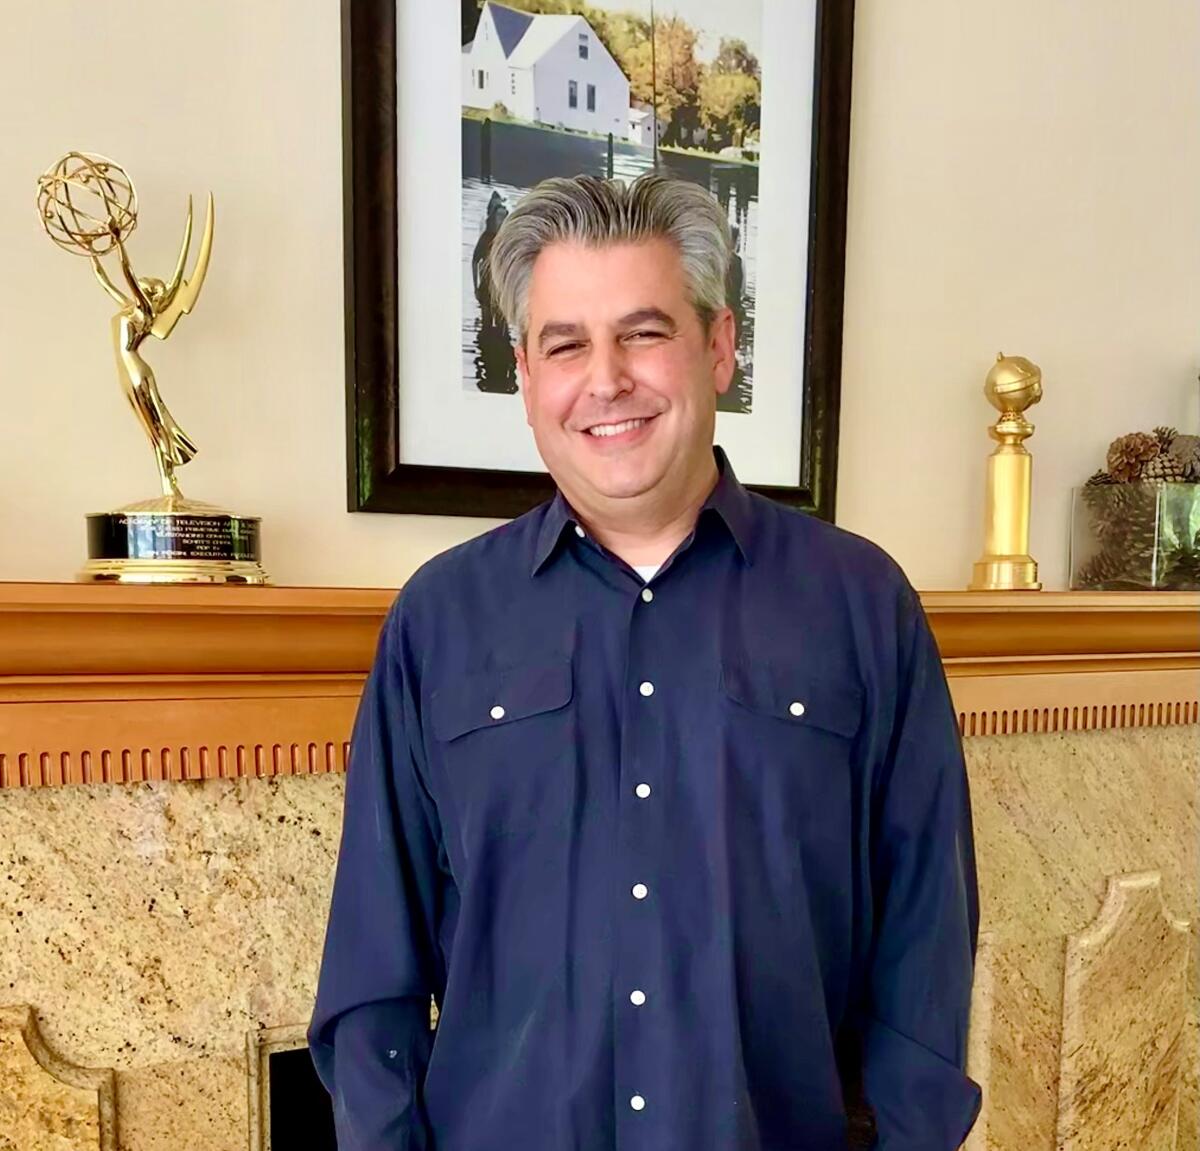 A man with gray hair, smiling in a blue button-up shirt, stands next to a mantel with Emmy and Golden Globe awards on it.